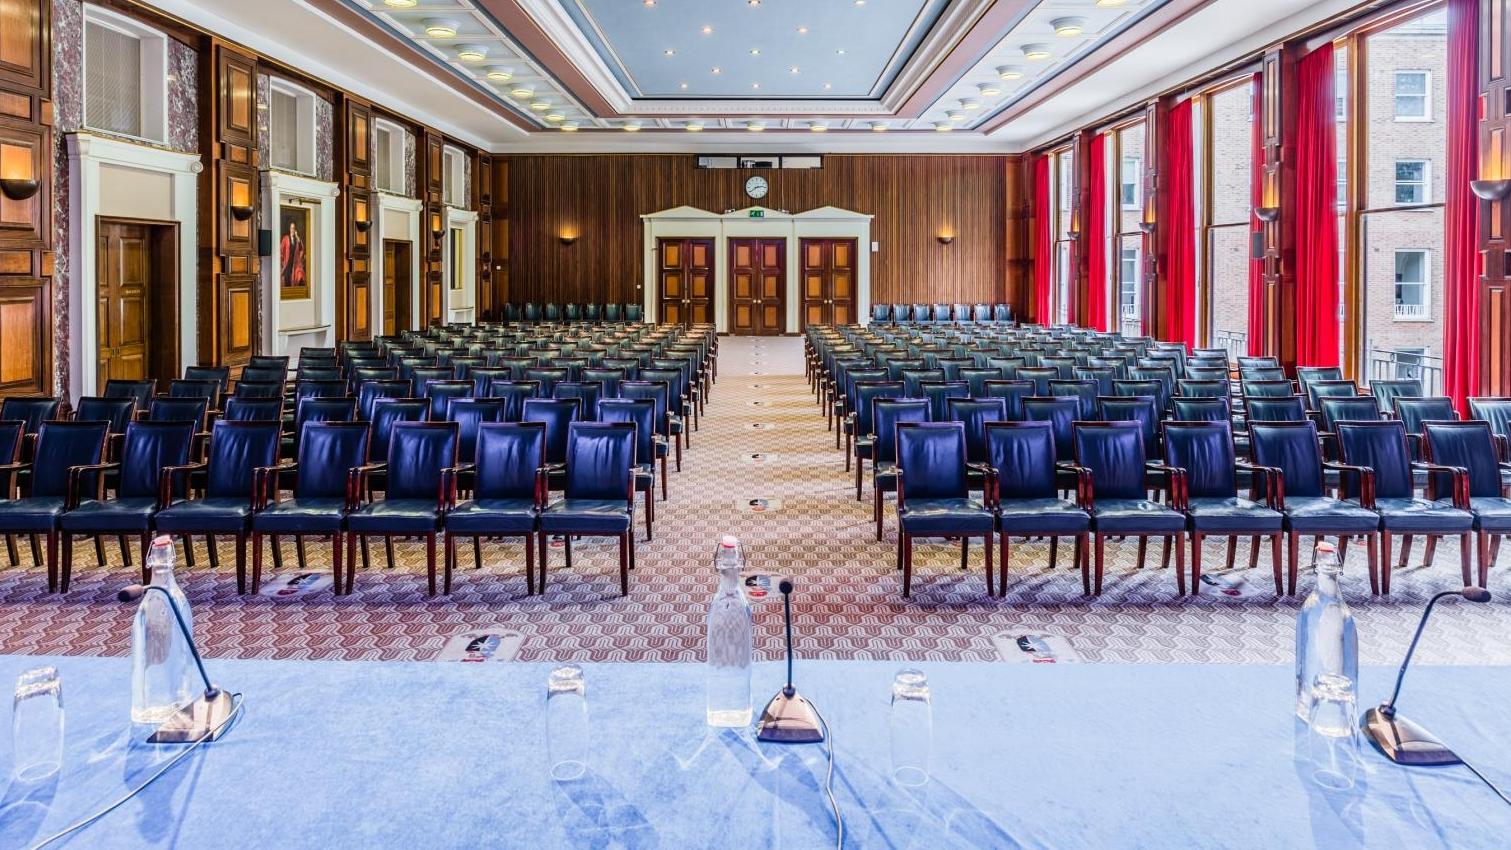 Find your Press Conference Venue in London